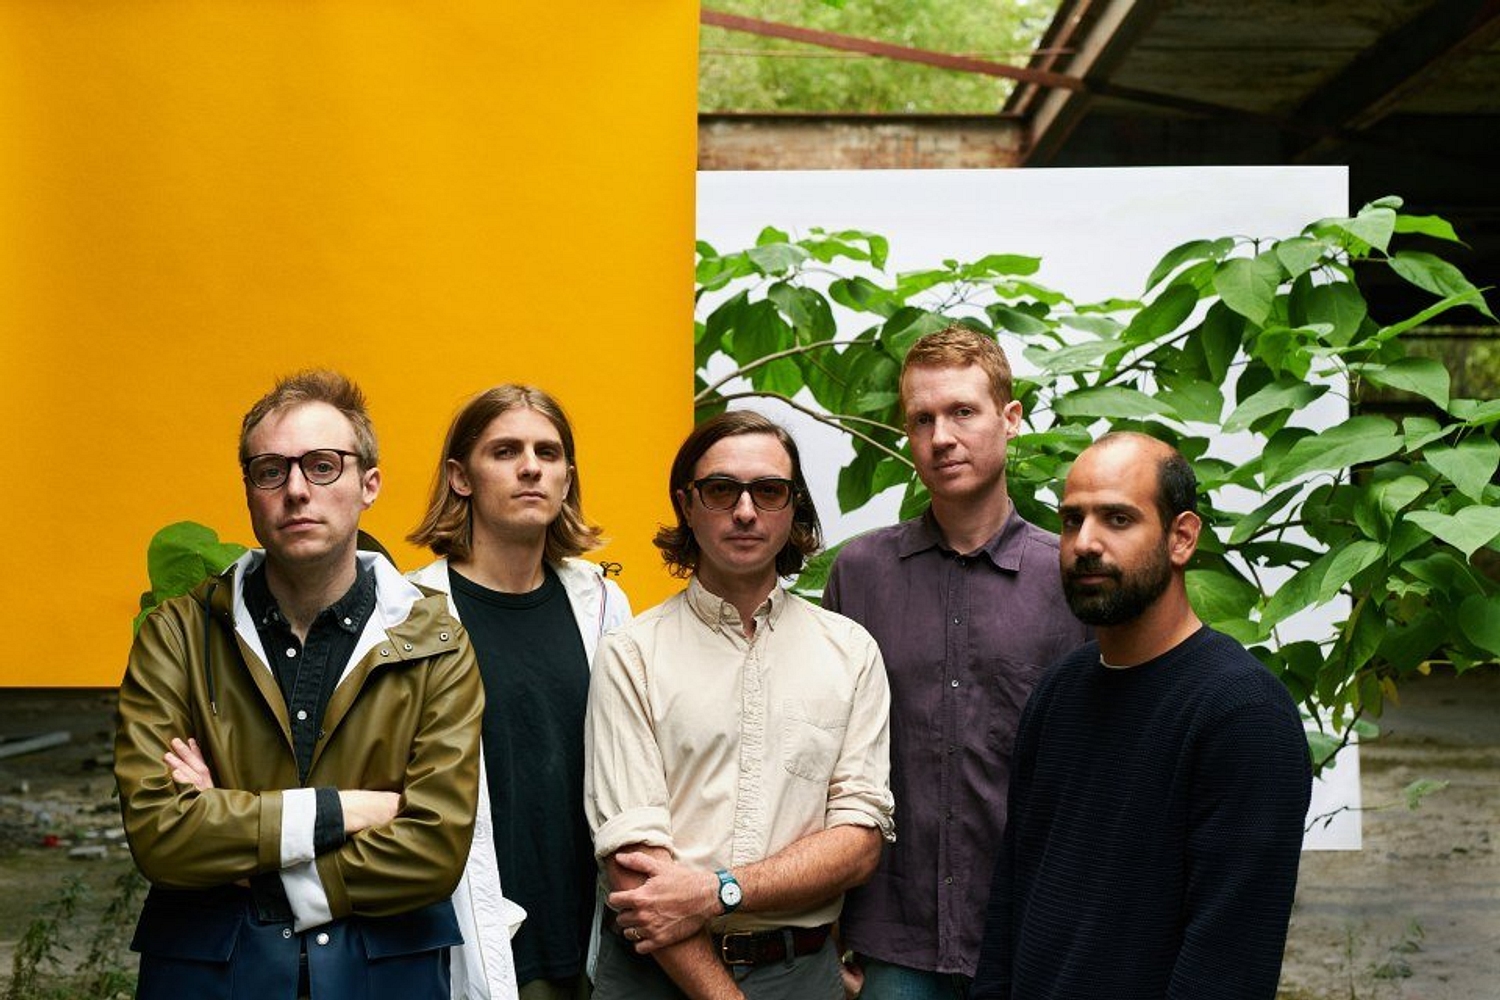 Real Estate announce new album ‘The Main Thing’